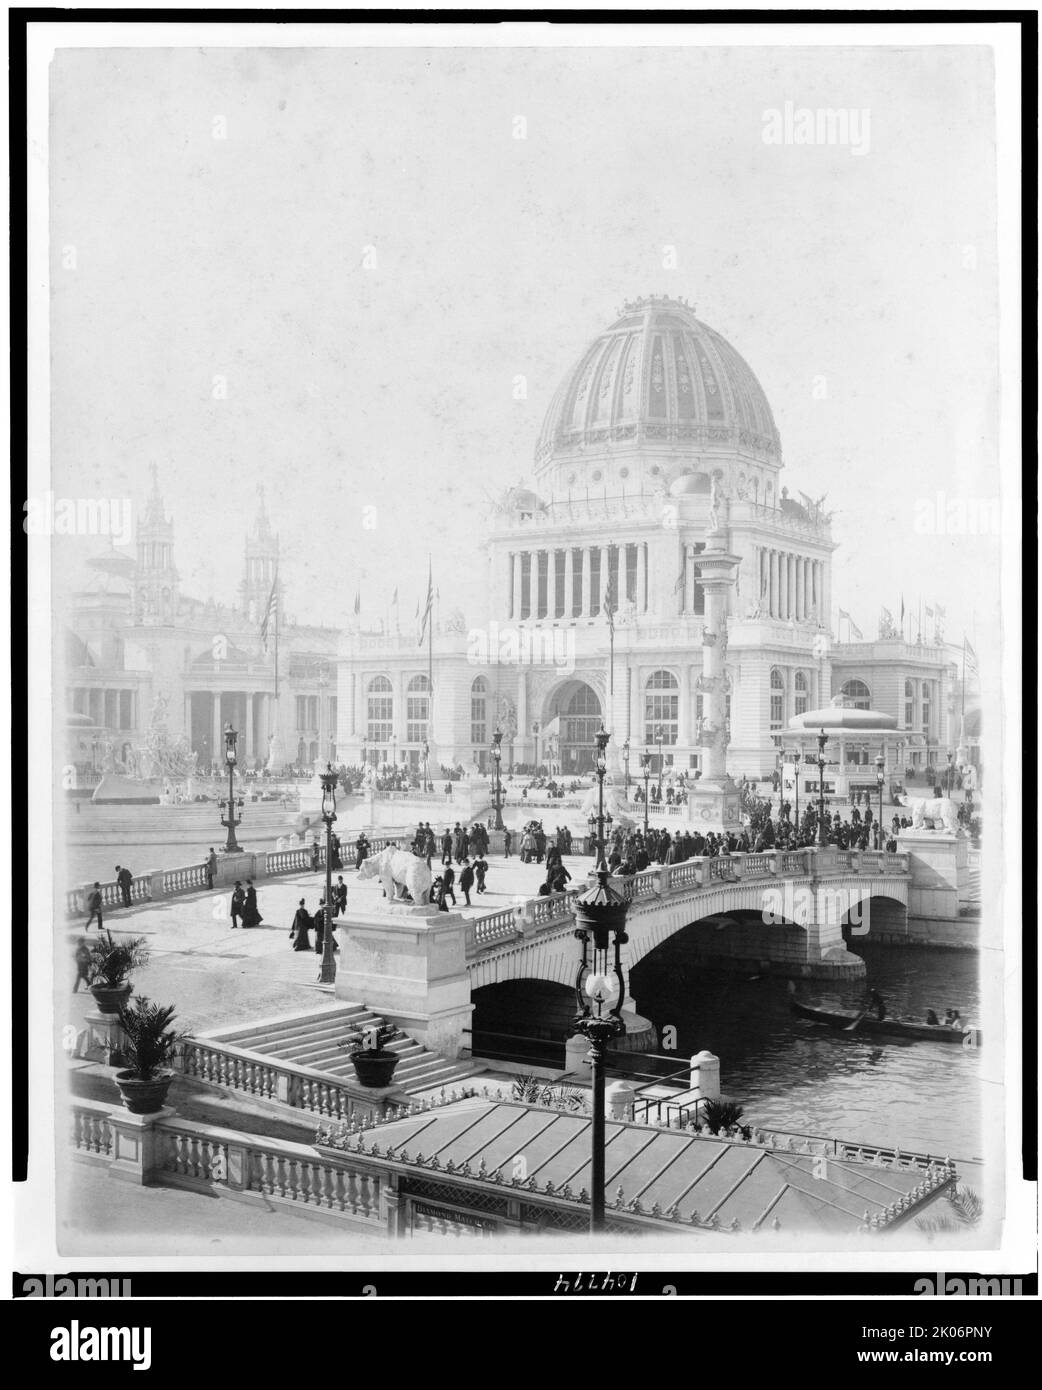 Exposition grounds, World's Columbian Exposition, Chicago, 1893. Crowds at the exhibition. Stock Photo